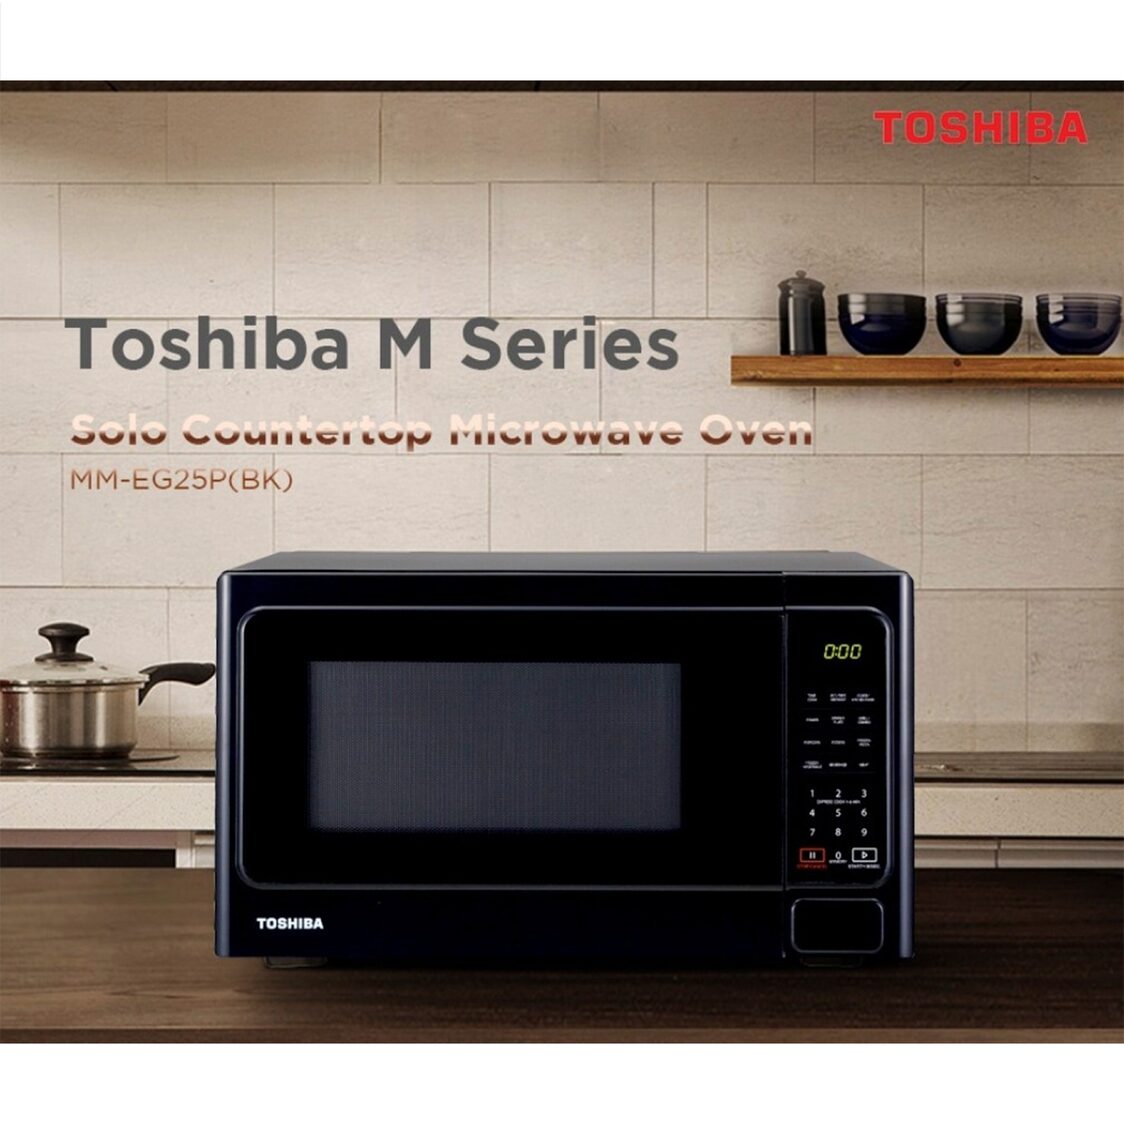 TOSHIBA 25L 1000W Microwave Oven with Grill Function (MM-EG25P BK) Metro Department Store